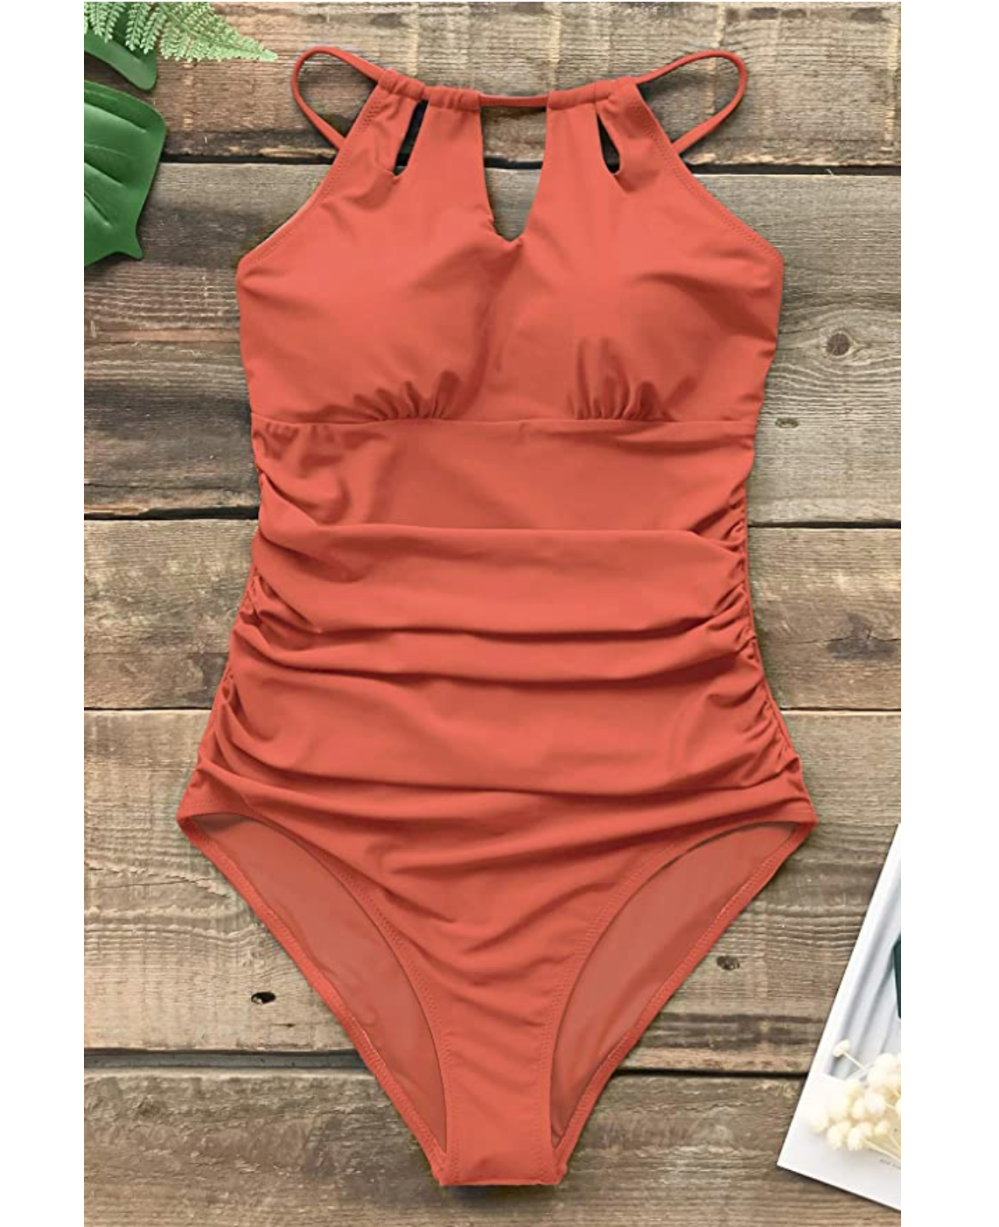 https://www.usmagazine.com/wp-content/uploads/2021/07/CUPSHE-Womens-One-Piece-High-Neck-Tummy-Control-Swimsuit.png?w=1000&quality=86&strip=all